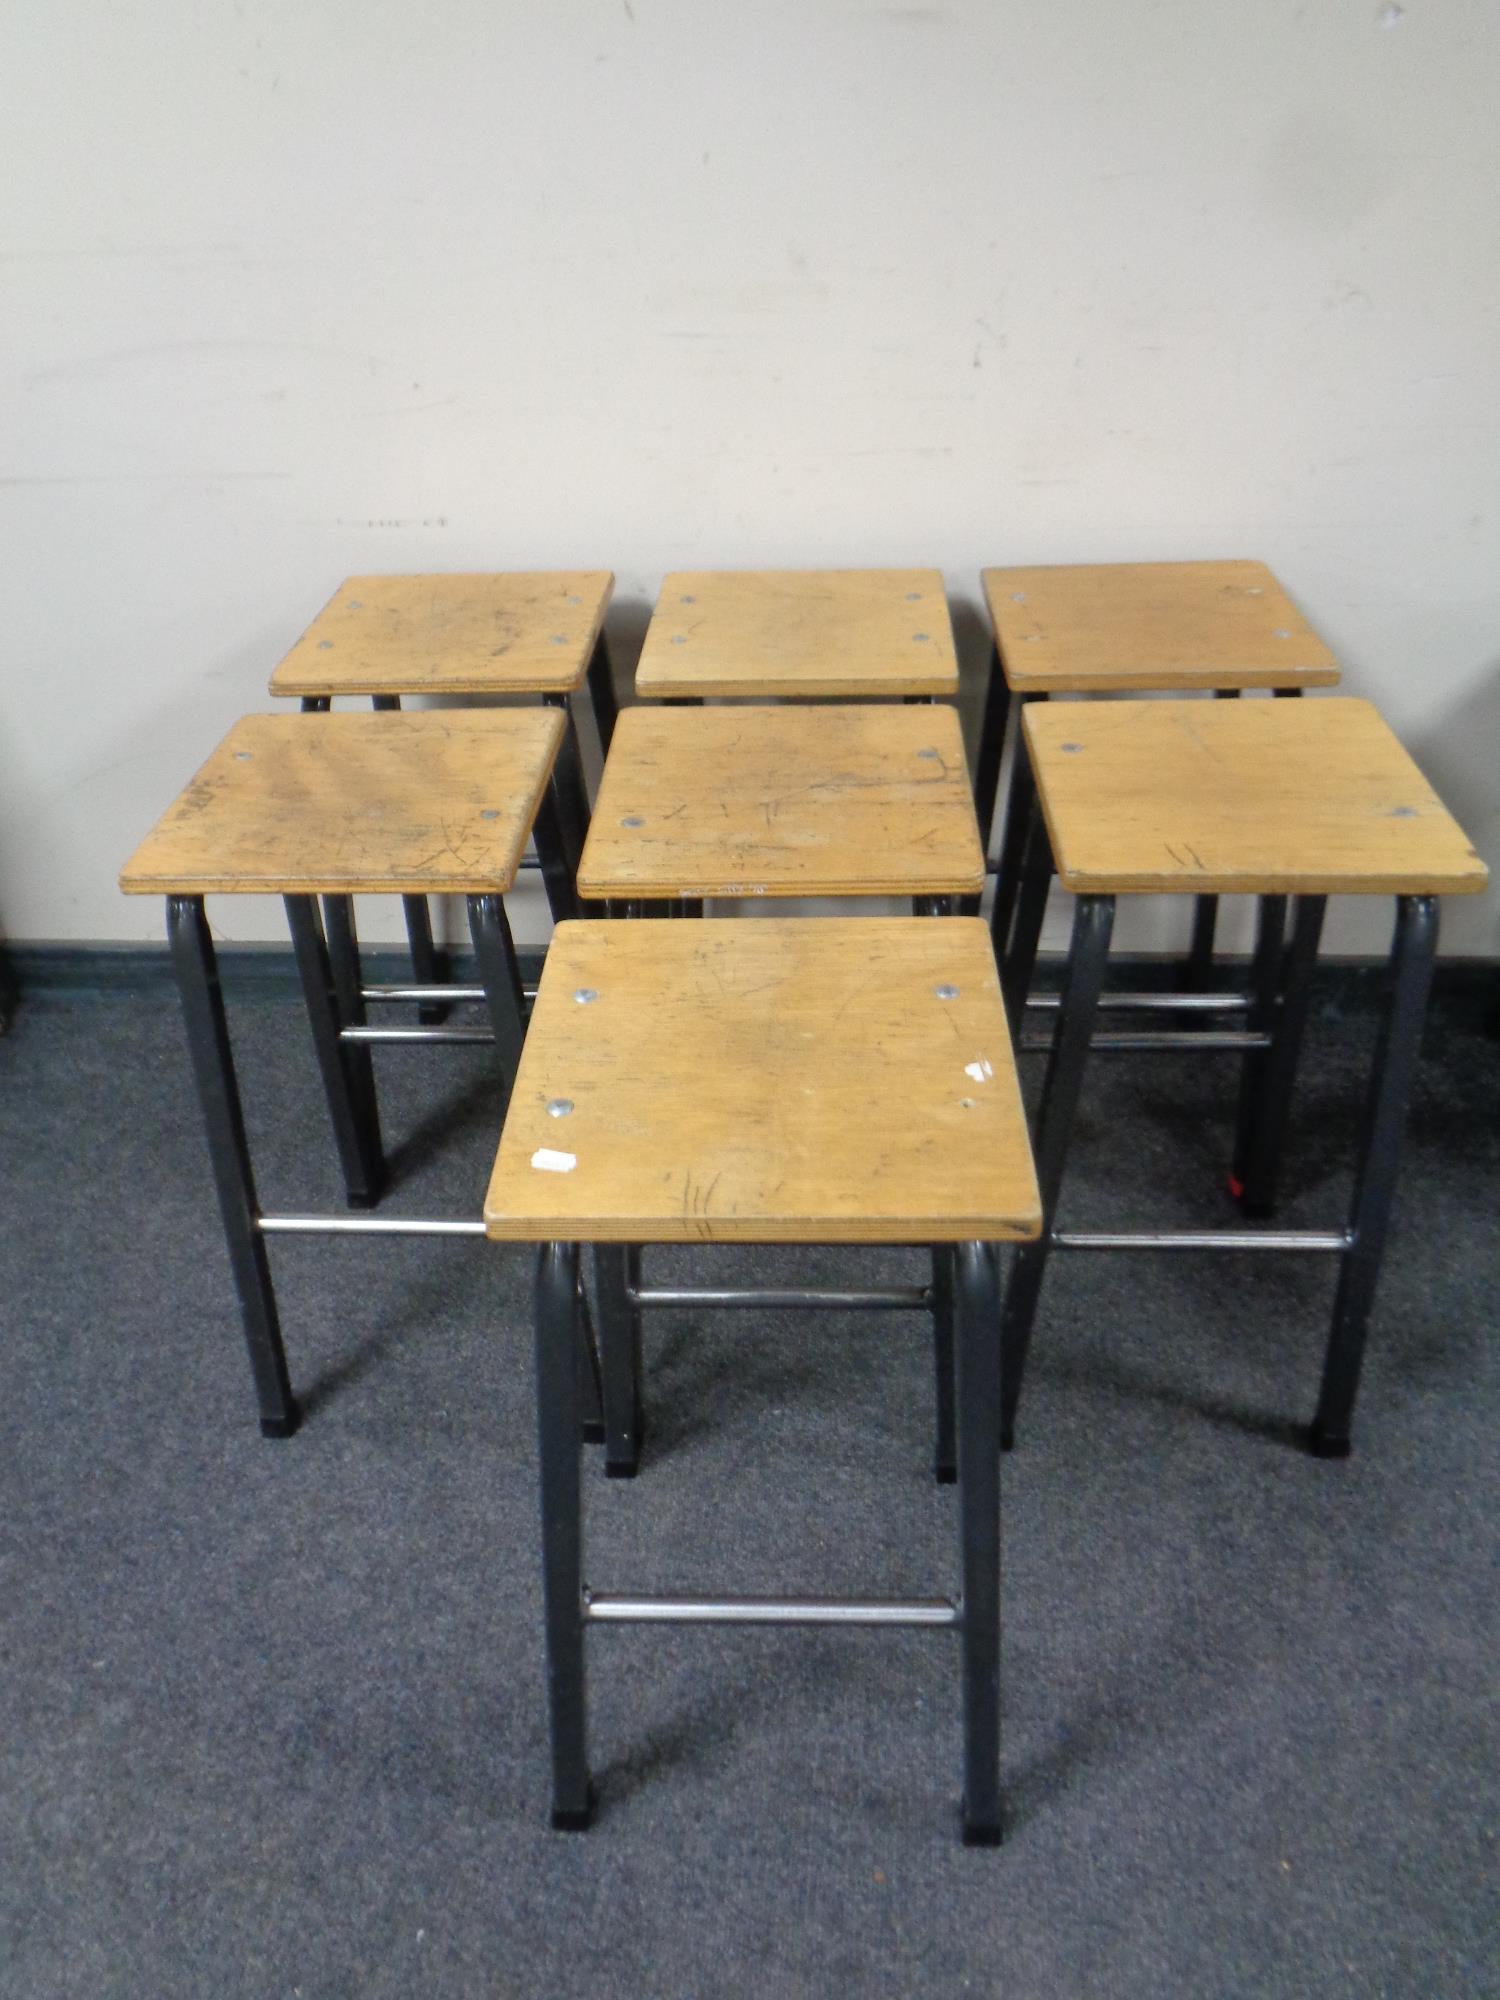 A set of seven plywood topped science lab stools on metal legs